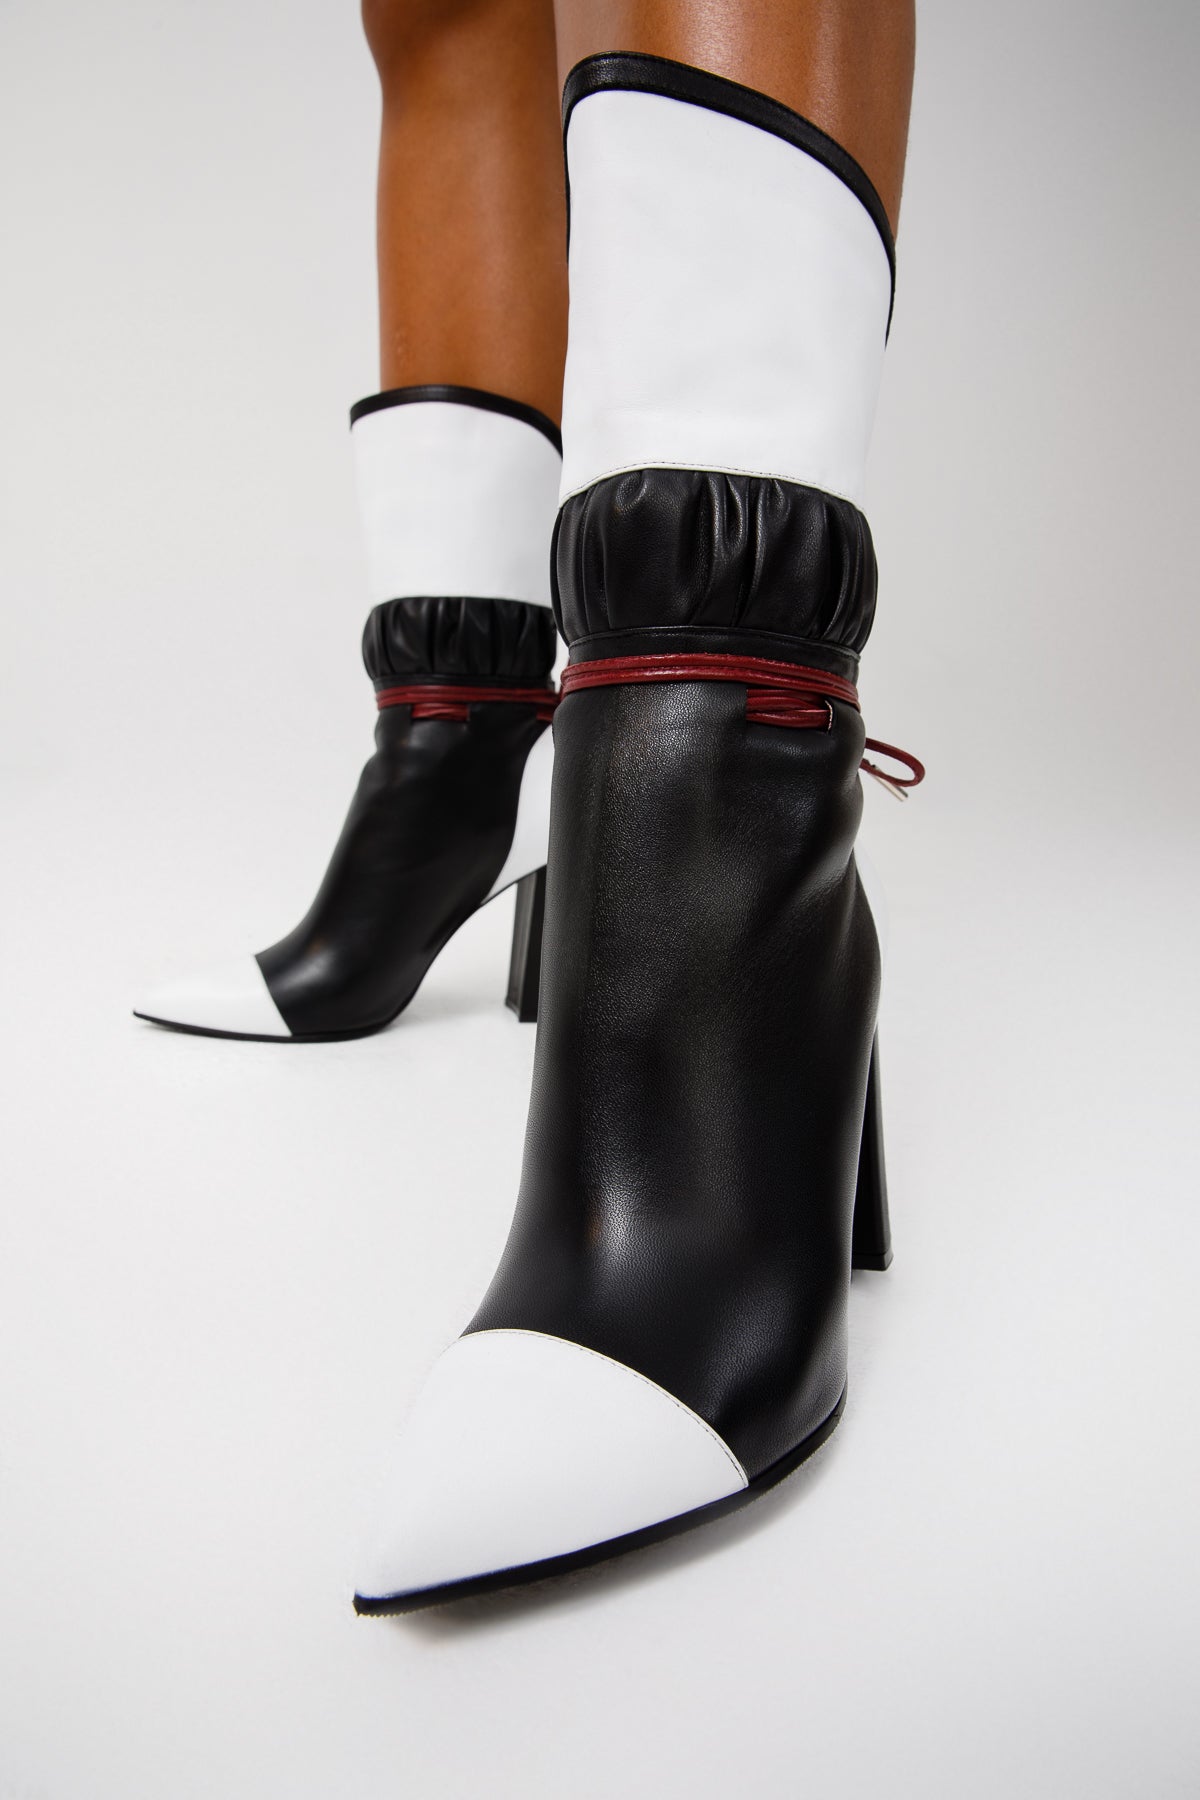 The Lucca Vinci Shoes Calf High – Boot Women Mid & Leather Limited White Black Leather Heel